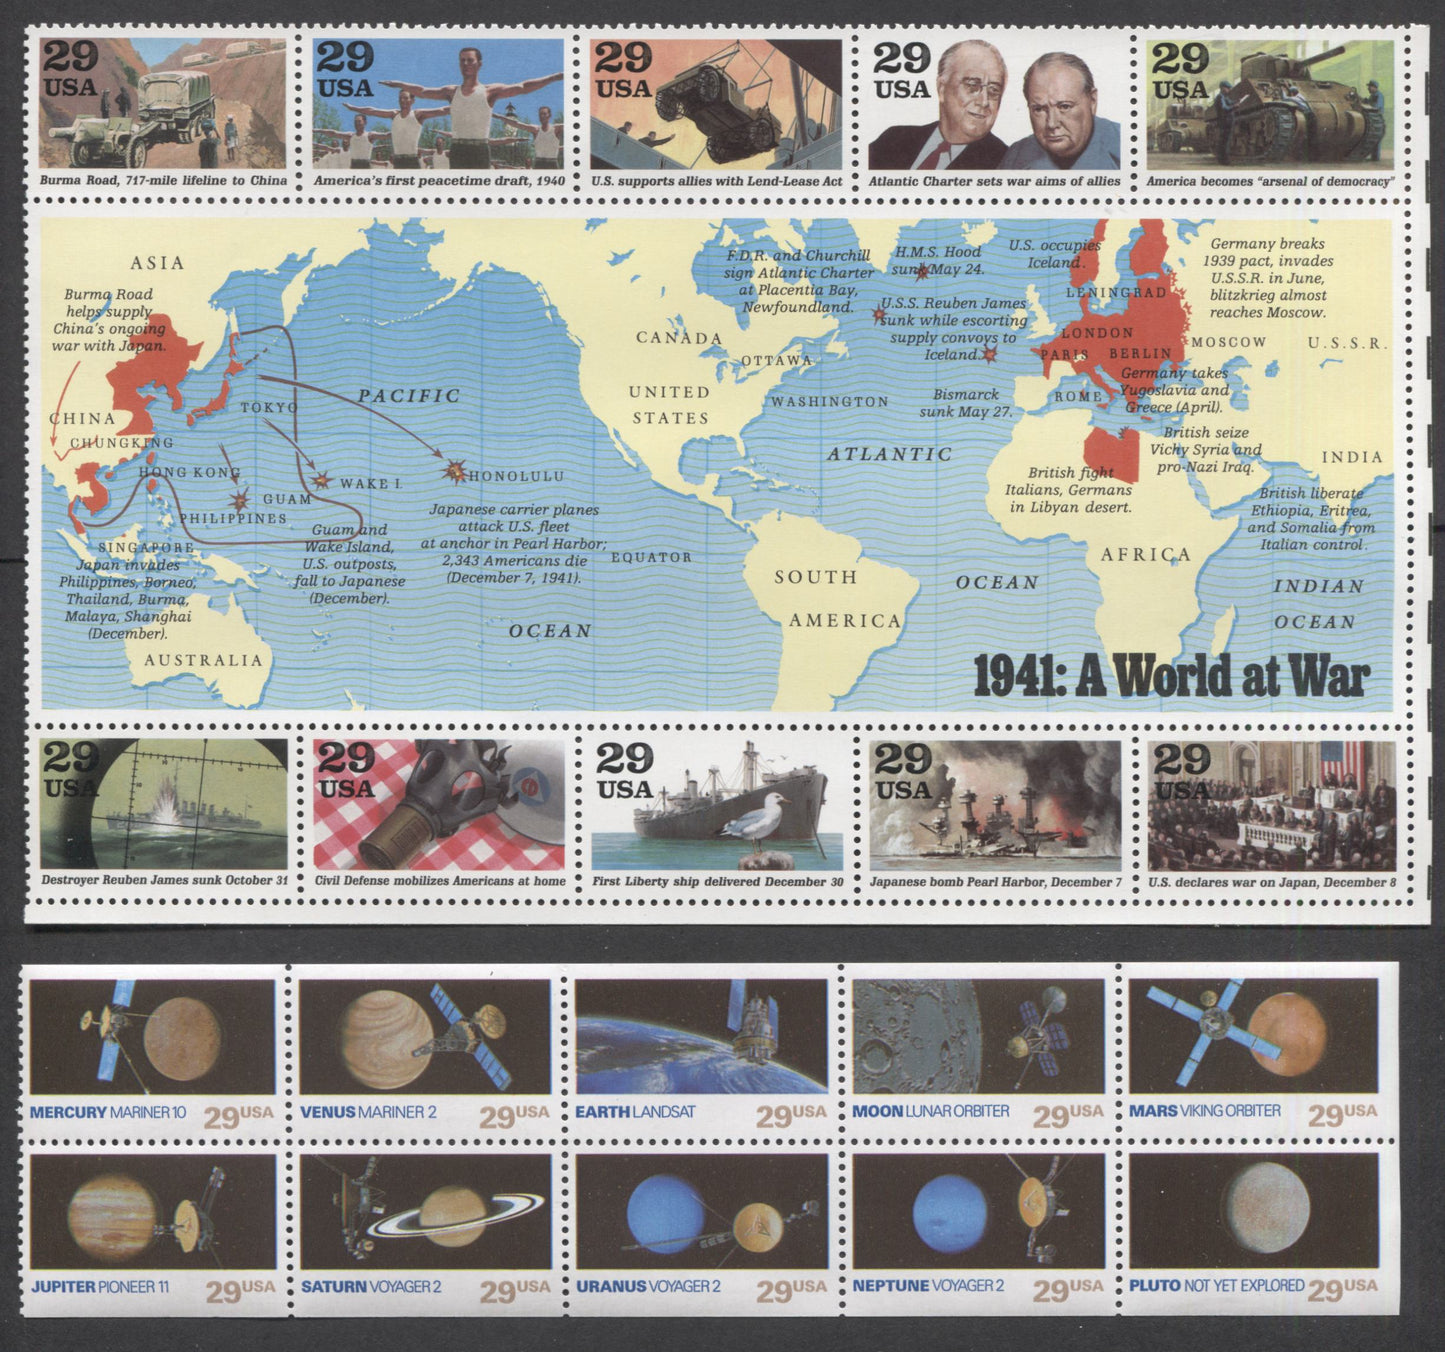 Lot 42 United States SC#2557a/2559 1991 WWII & Space Exploration Issues, 2 VFNH Blocks Of 10, Click on Listing to See ALL Pictures, 2017 Scott Cat. $16.5